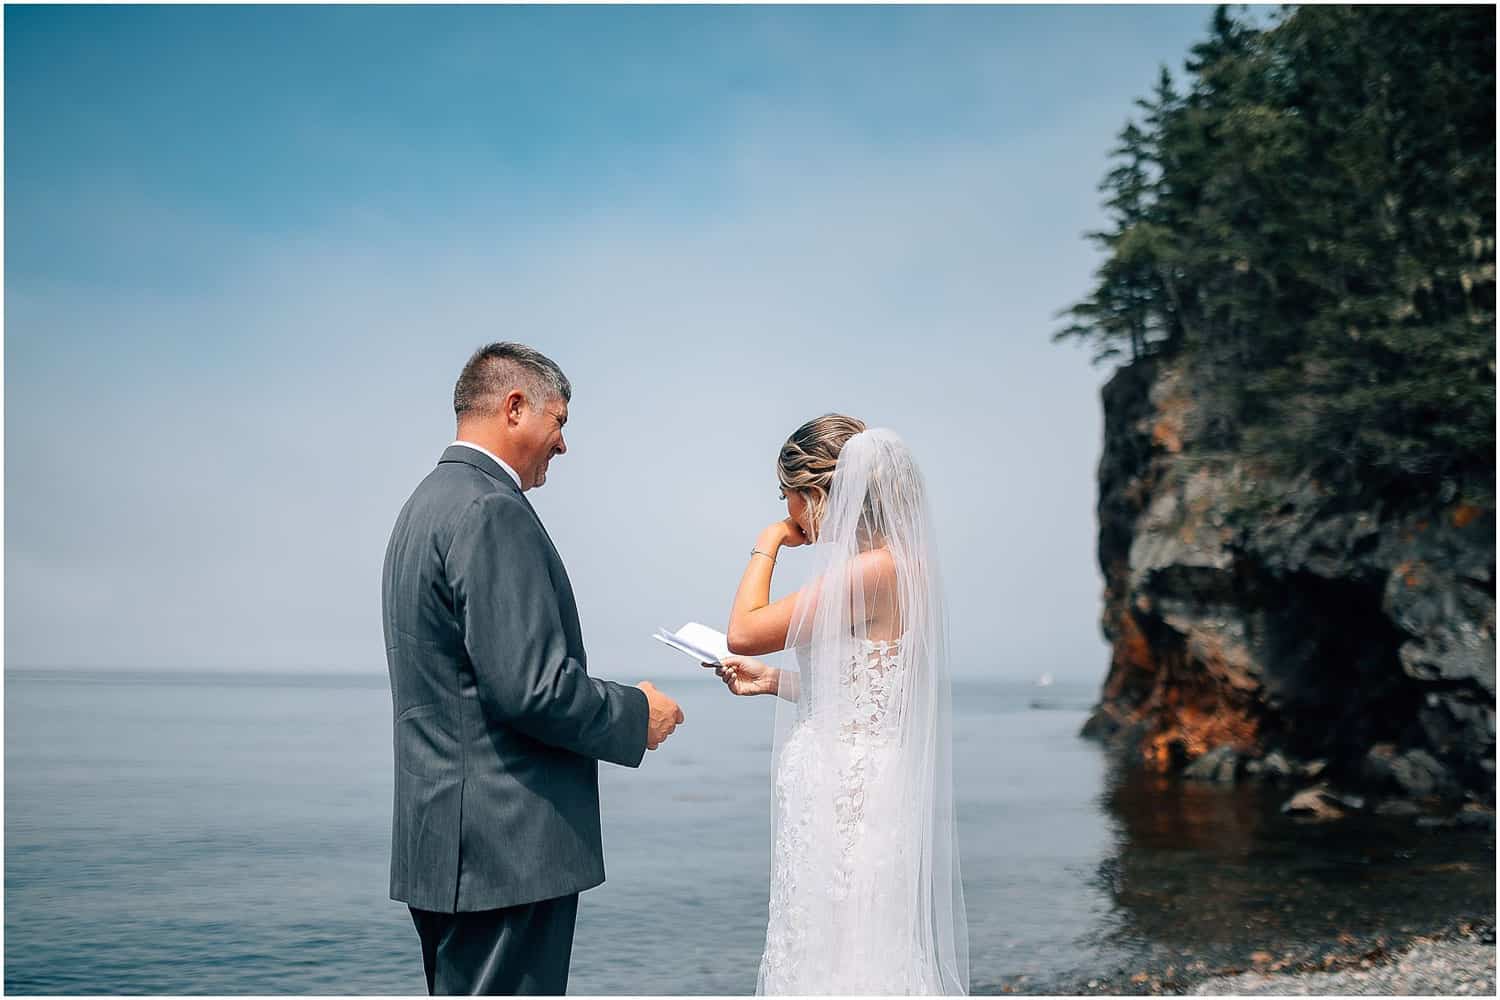 A bride and groom reading vows in front of the water.